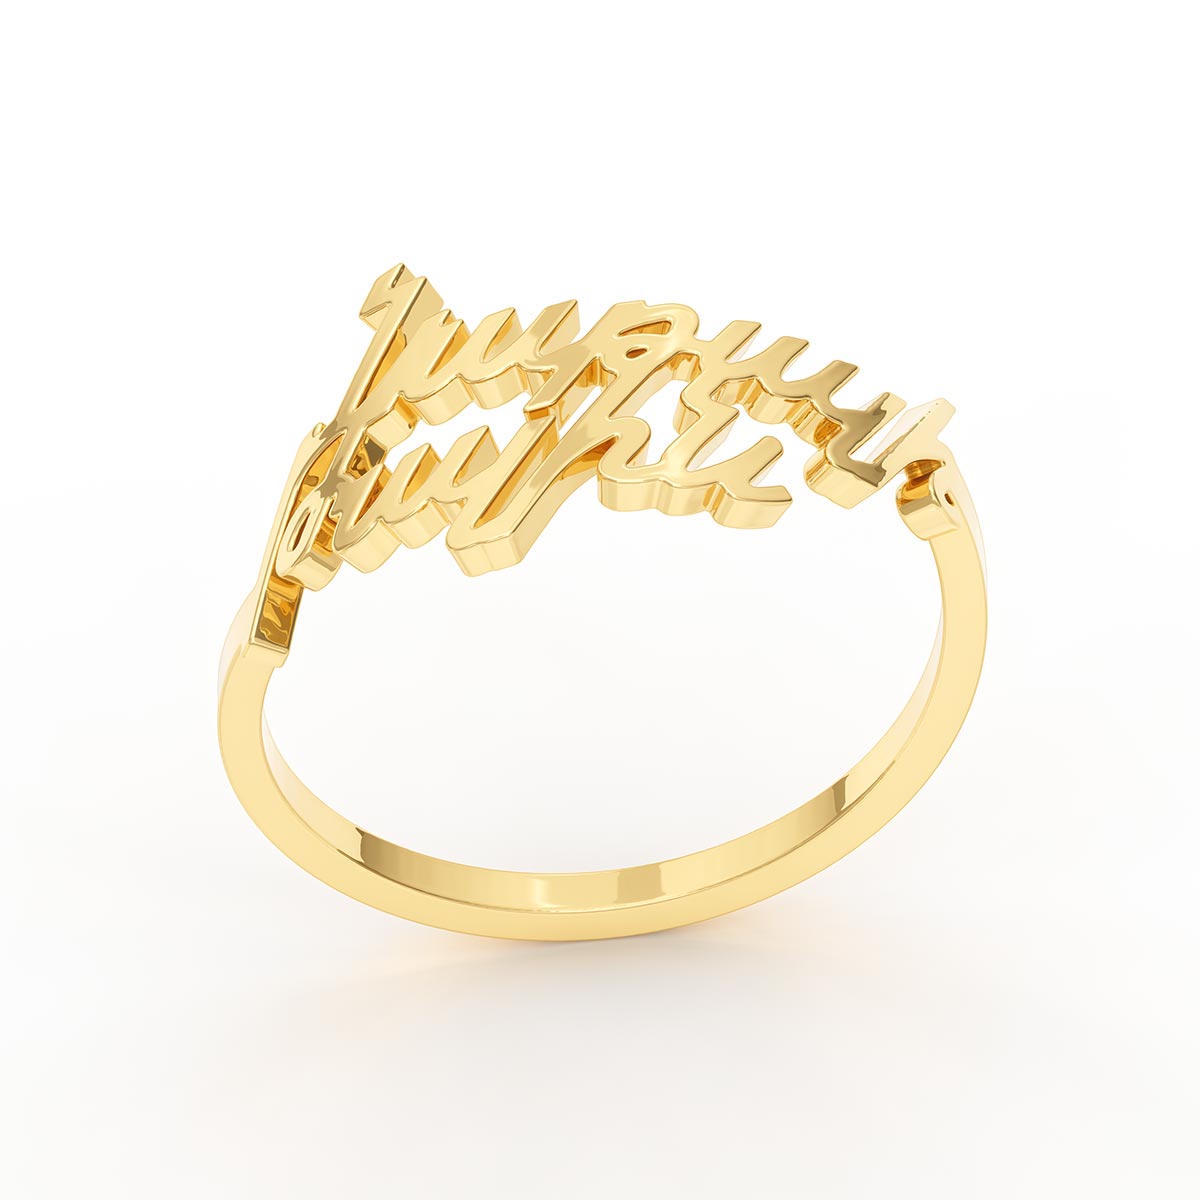 Personalized 2 Armenian Name Ring